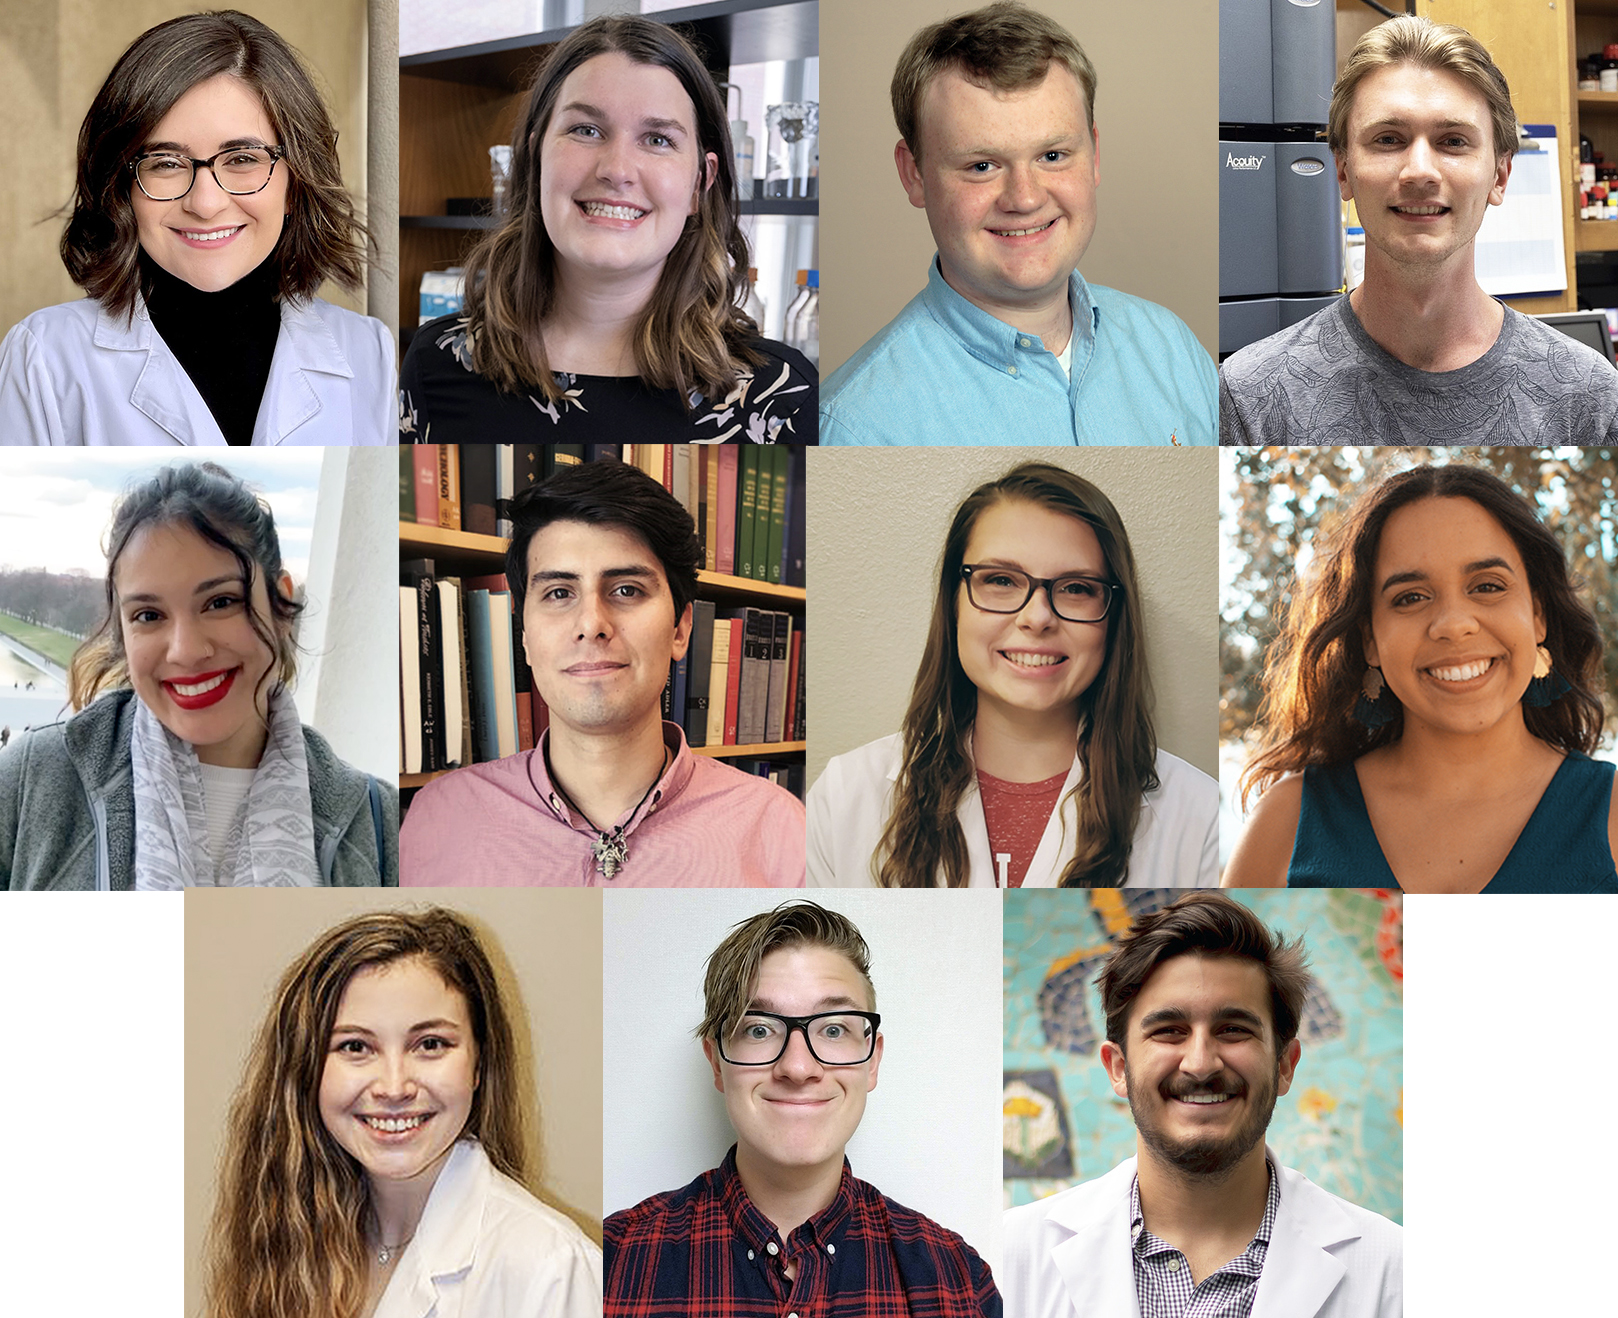 Side-by-side headshots of the listed students—pictured in rows of 4, 4, and 3—in the following order: Minna Apostolova, Andreanna Burman, Drew Dixson, Kevin McCarty, Teresa Piedad Torres, Jose Zepeda, Kaeli Bryant, Julissa Burgos, Heather Hartmann, Reese Martin, Zach Sanchez.